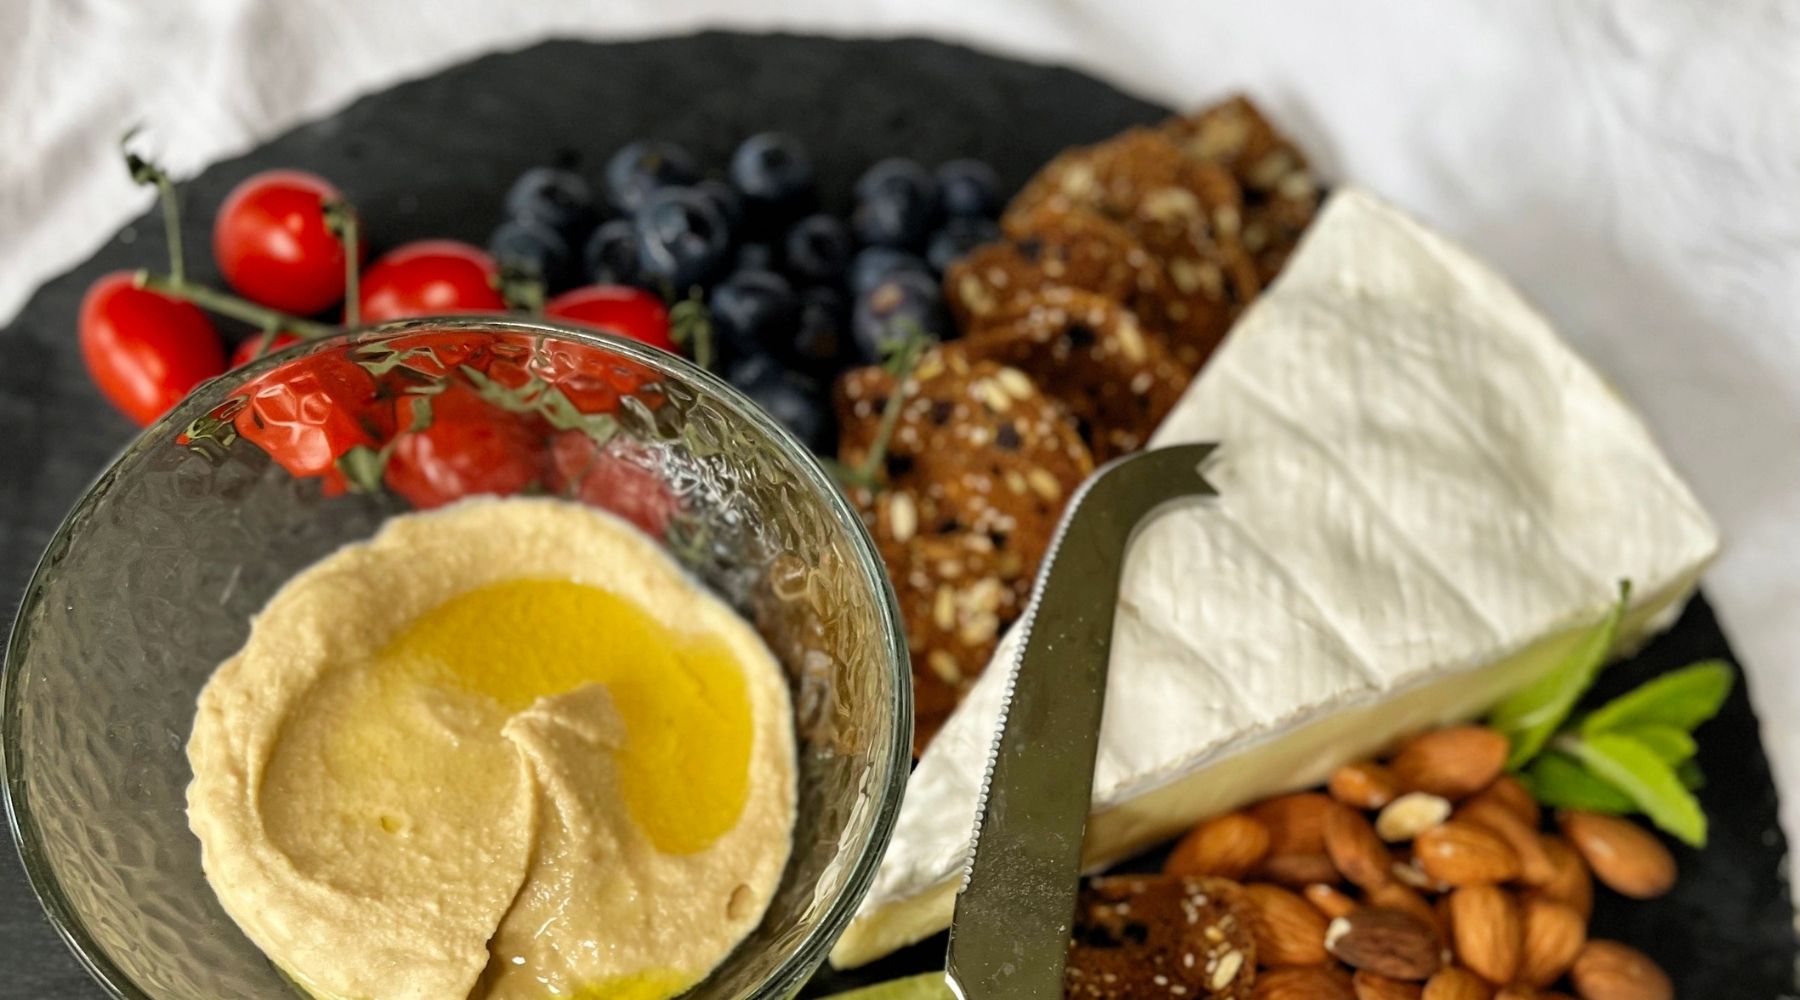 A gluten-free cheese board made up of a round charcoal slate, wild blueberry walnut crisps, brie, almonds, grapes, vine tomatoes and hummus. 